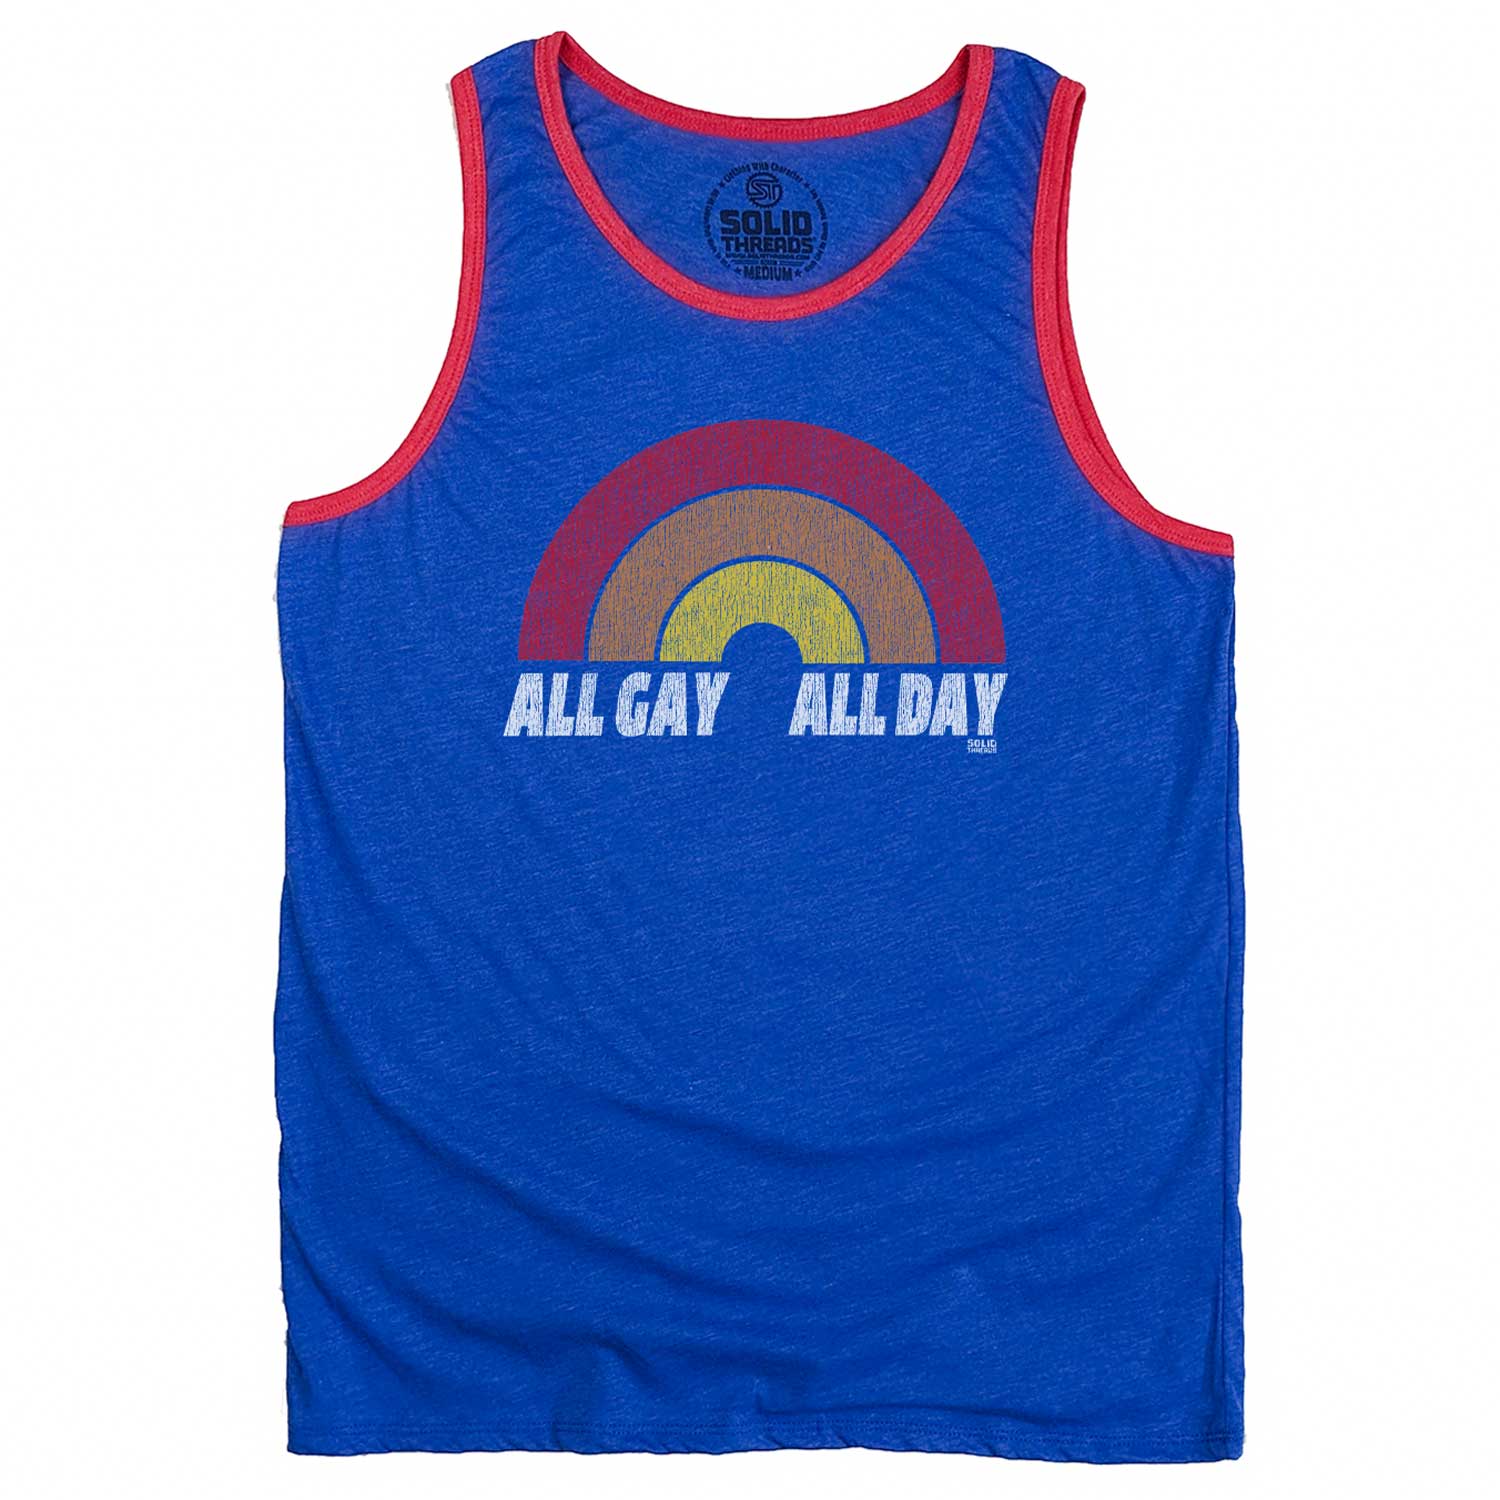 Men's All Gay All Day Vintage Graphic Tank Top | Funny LGBTQ Pride Sleeveless Shirt | SOLID THREADS